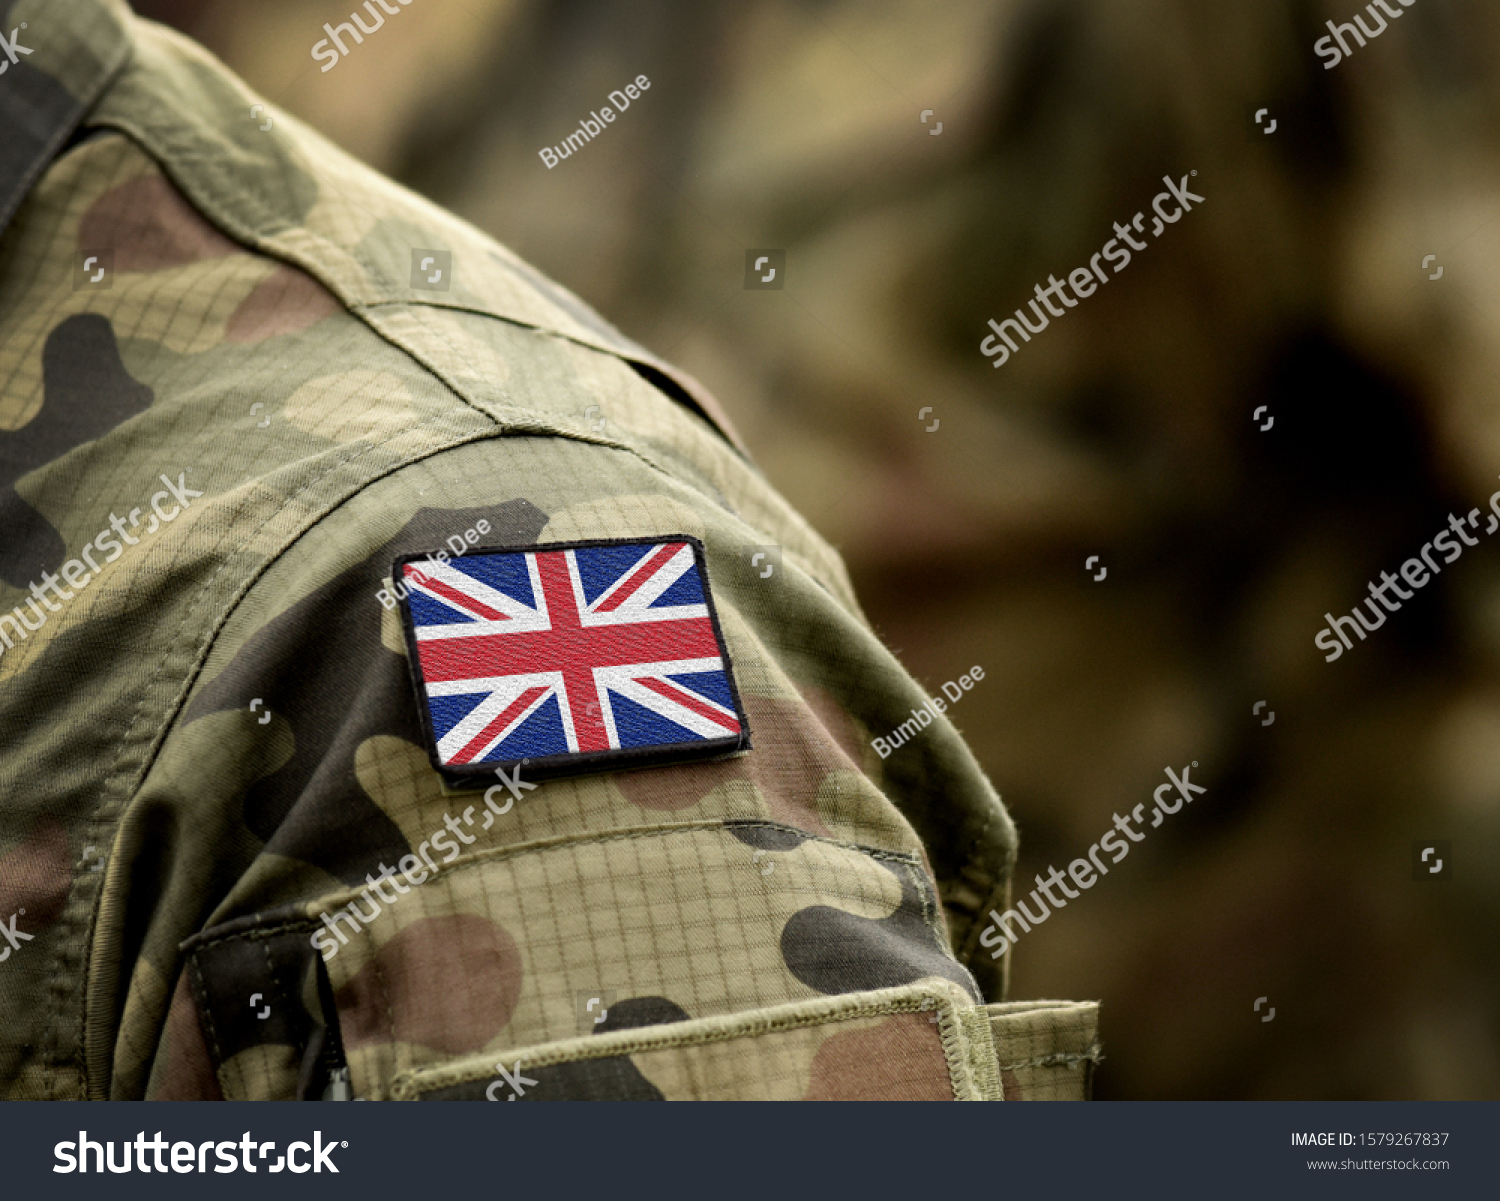 Flag of United Kingdom on military uniform. UK Army. British Armed Forces, soldiers. Collage. #1579267837